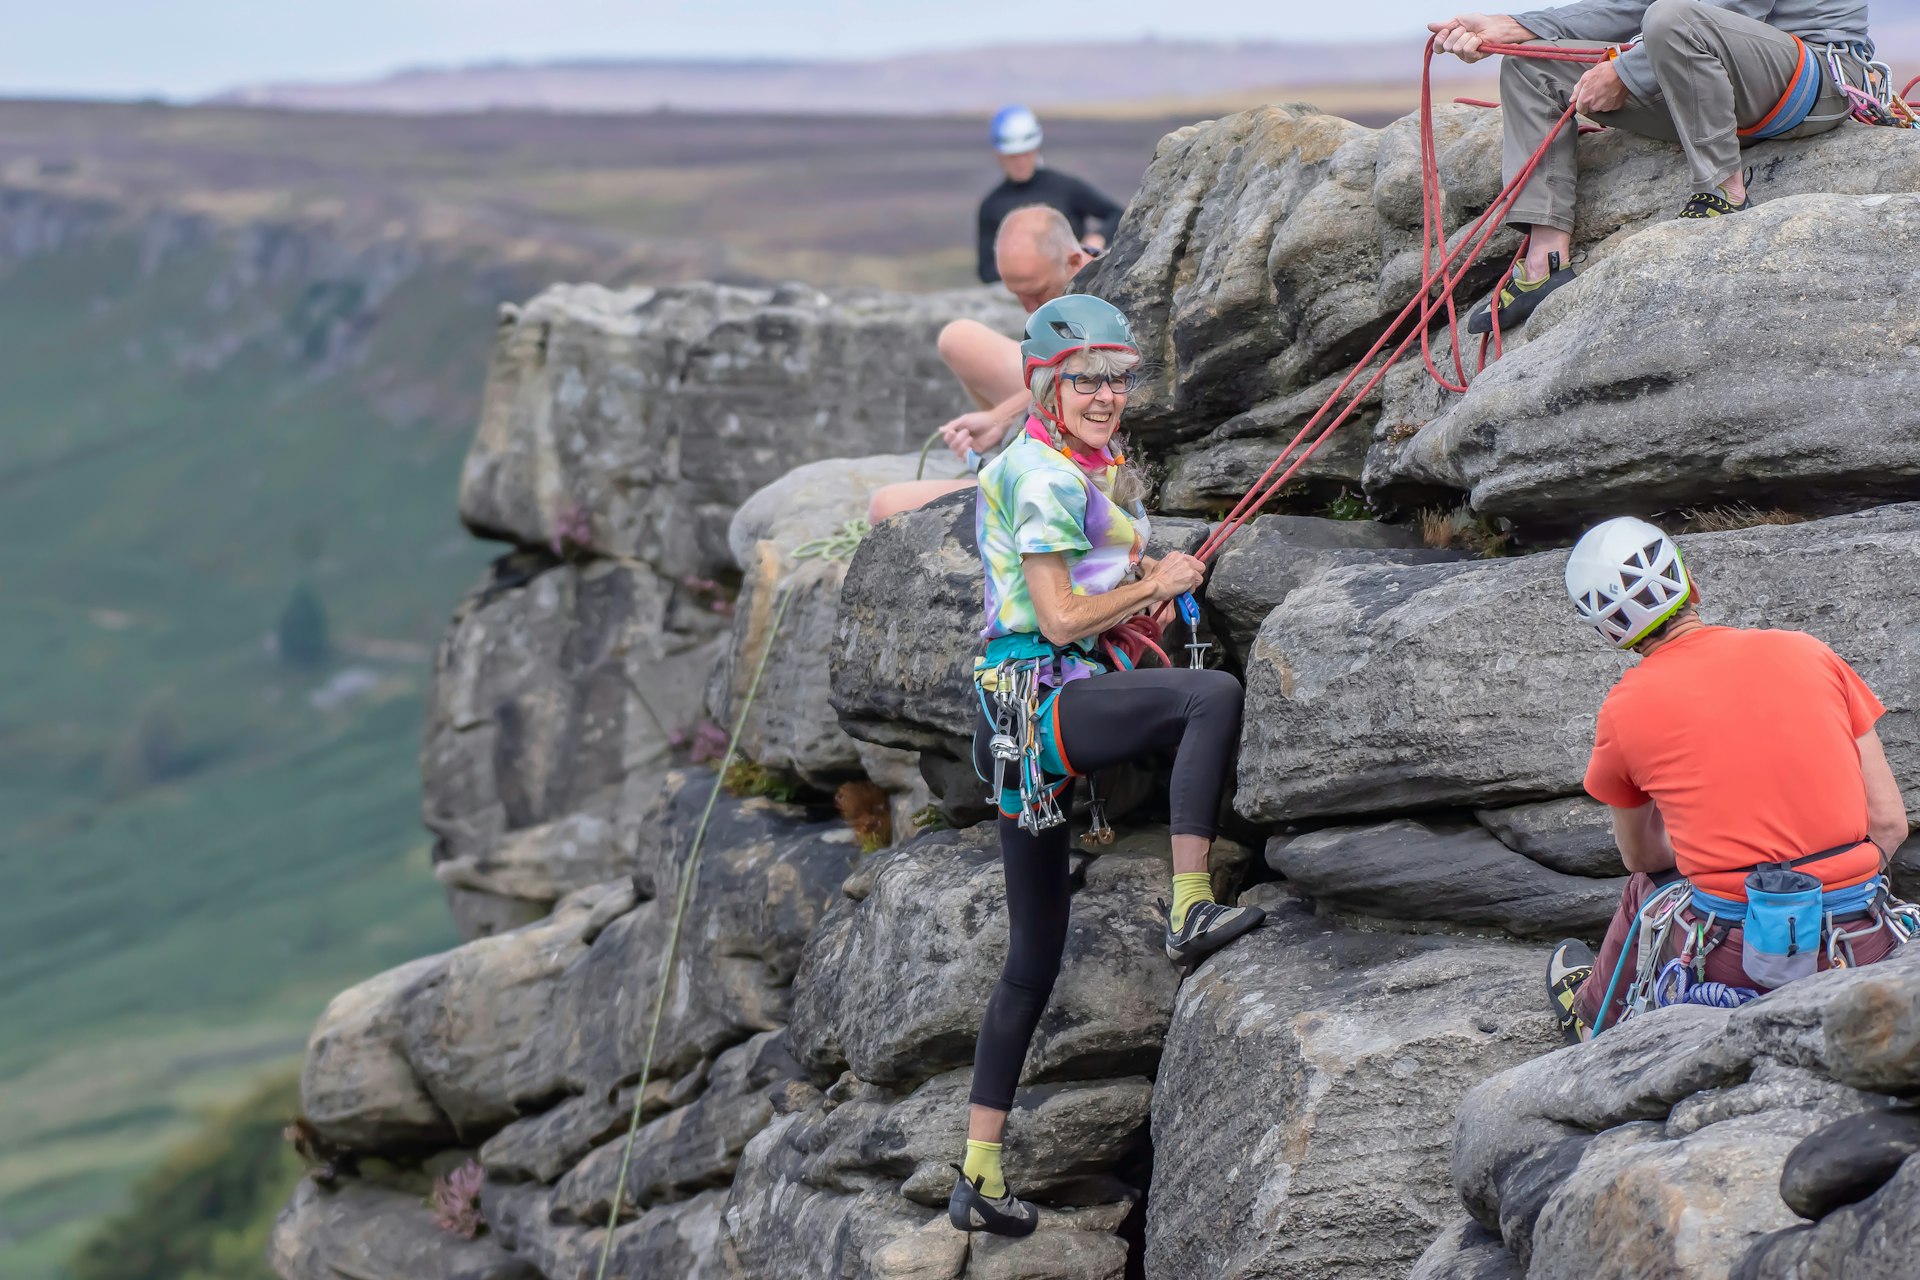 A lady in her 60s wearing climbing gear and ropes smiles as she attempts to climb down a cliff face